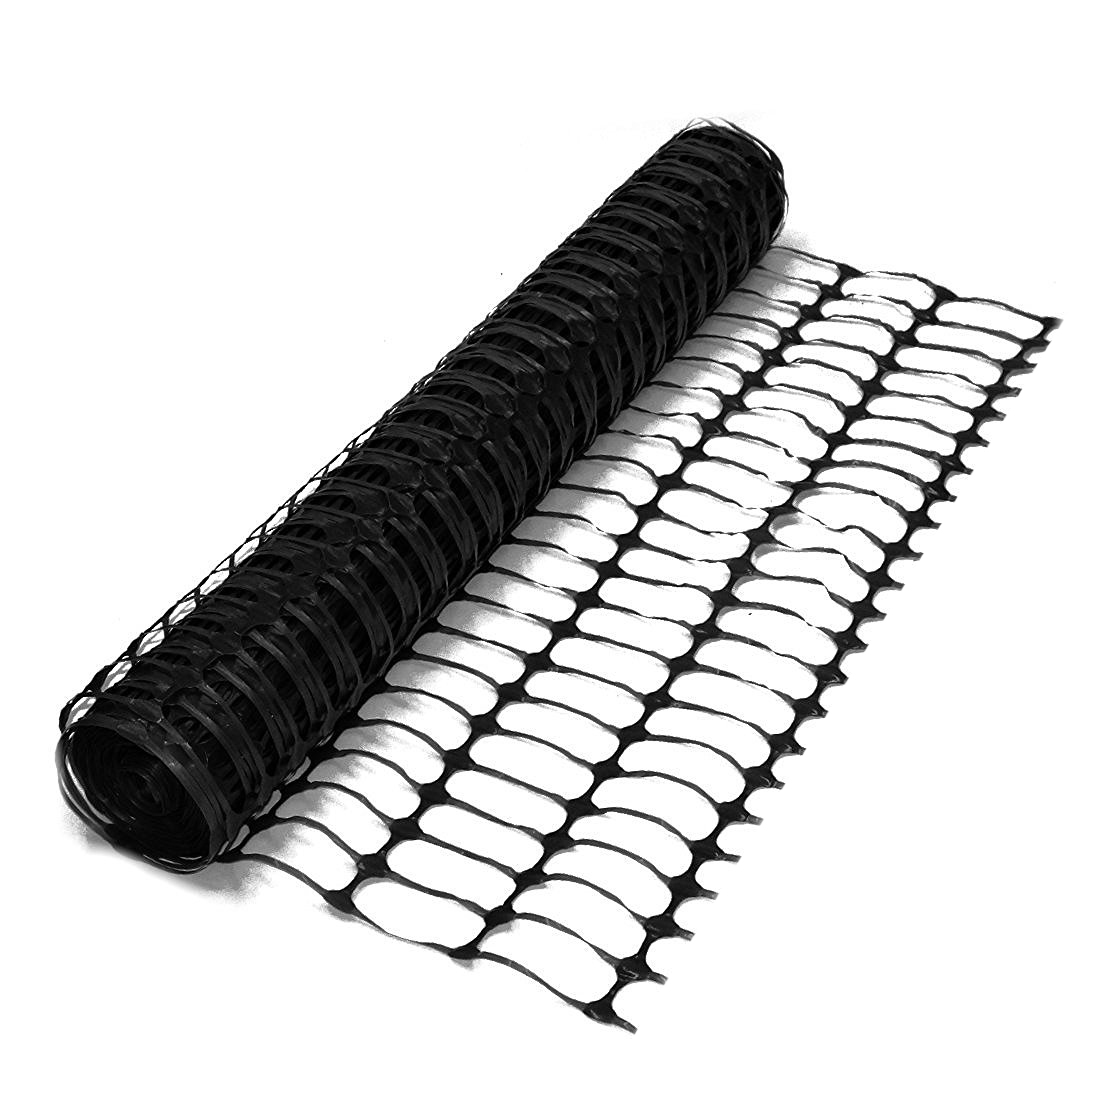 Heavy Duty Black Safety Barrier Mesh Fencing 1mtr x 15mtr - Click Image to Close